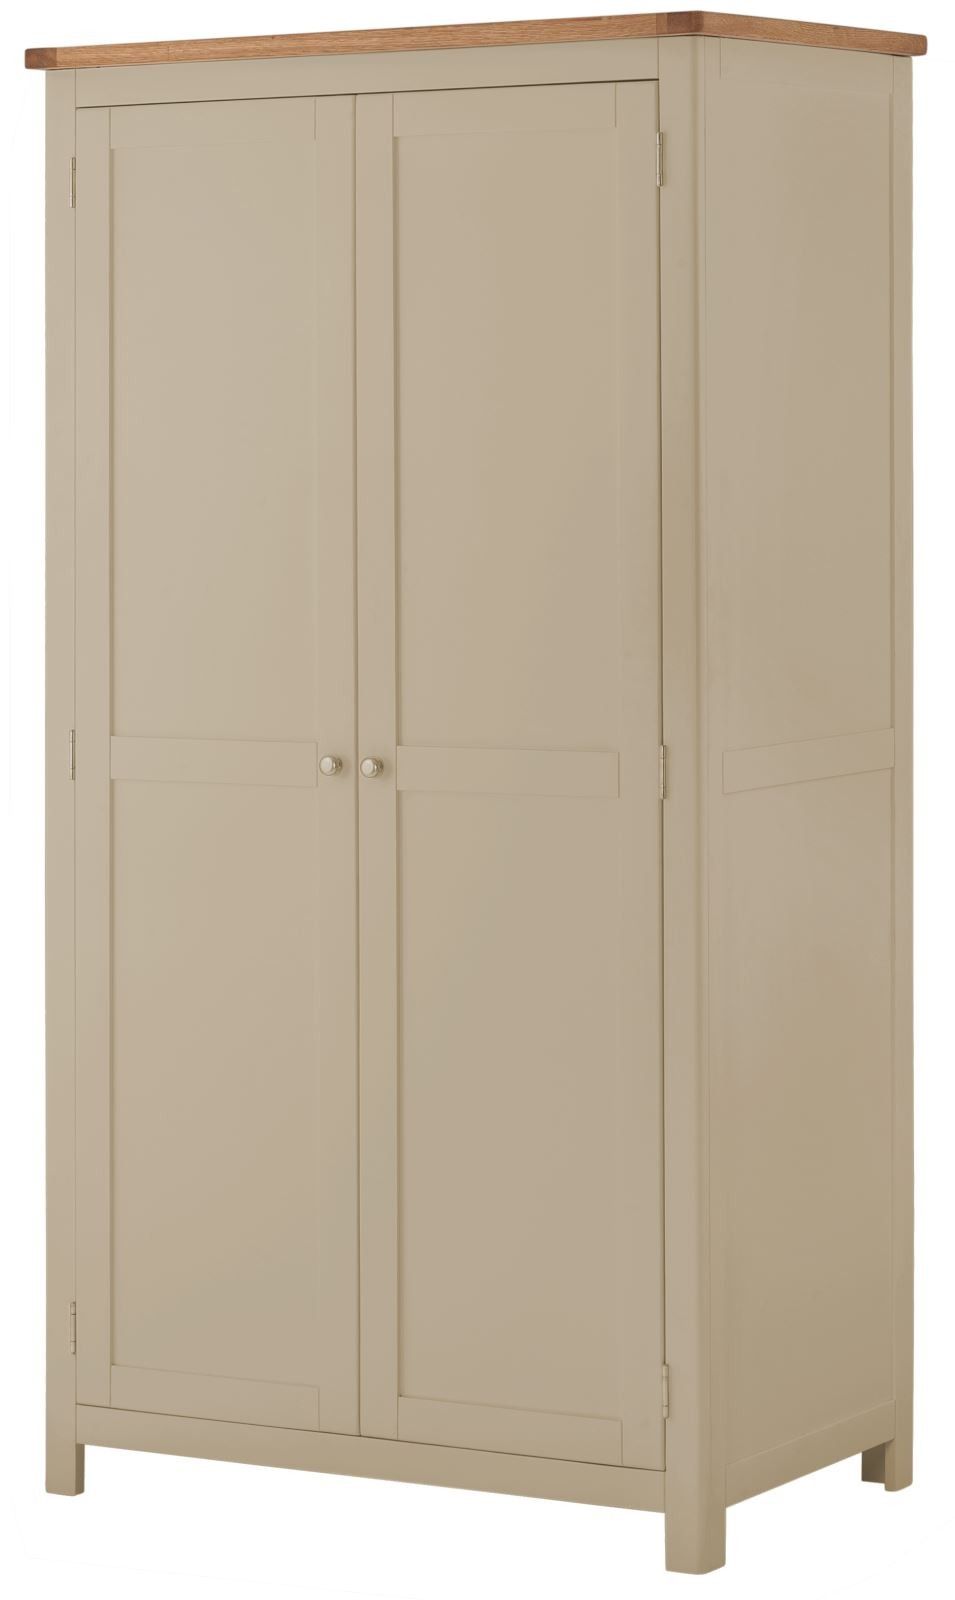 Purbeck Painted 2 Door All Hanging Wardrobe - Stone